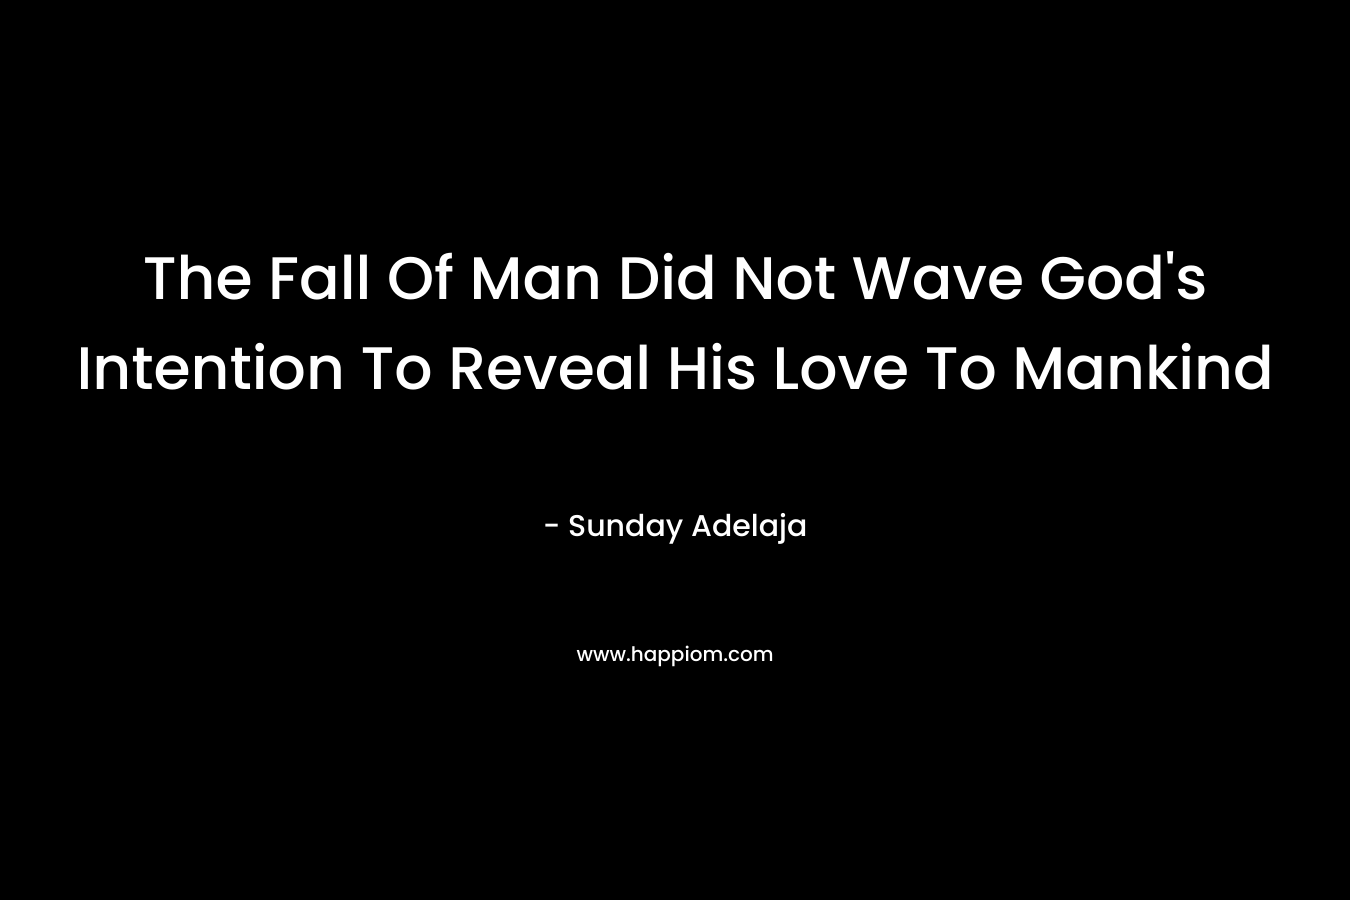 The Fall Of Man Did Not Wave God's Intention To Reveal His Love To Mankind